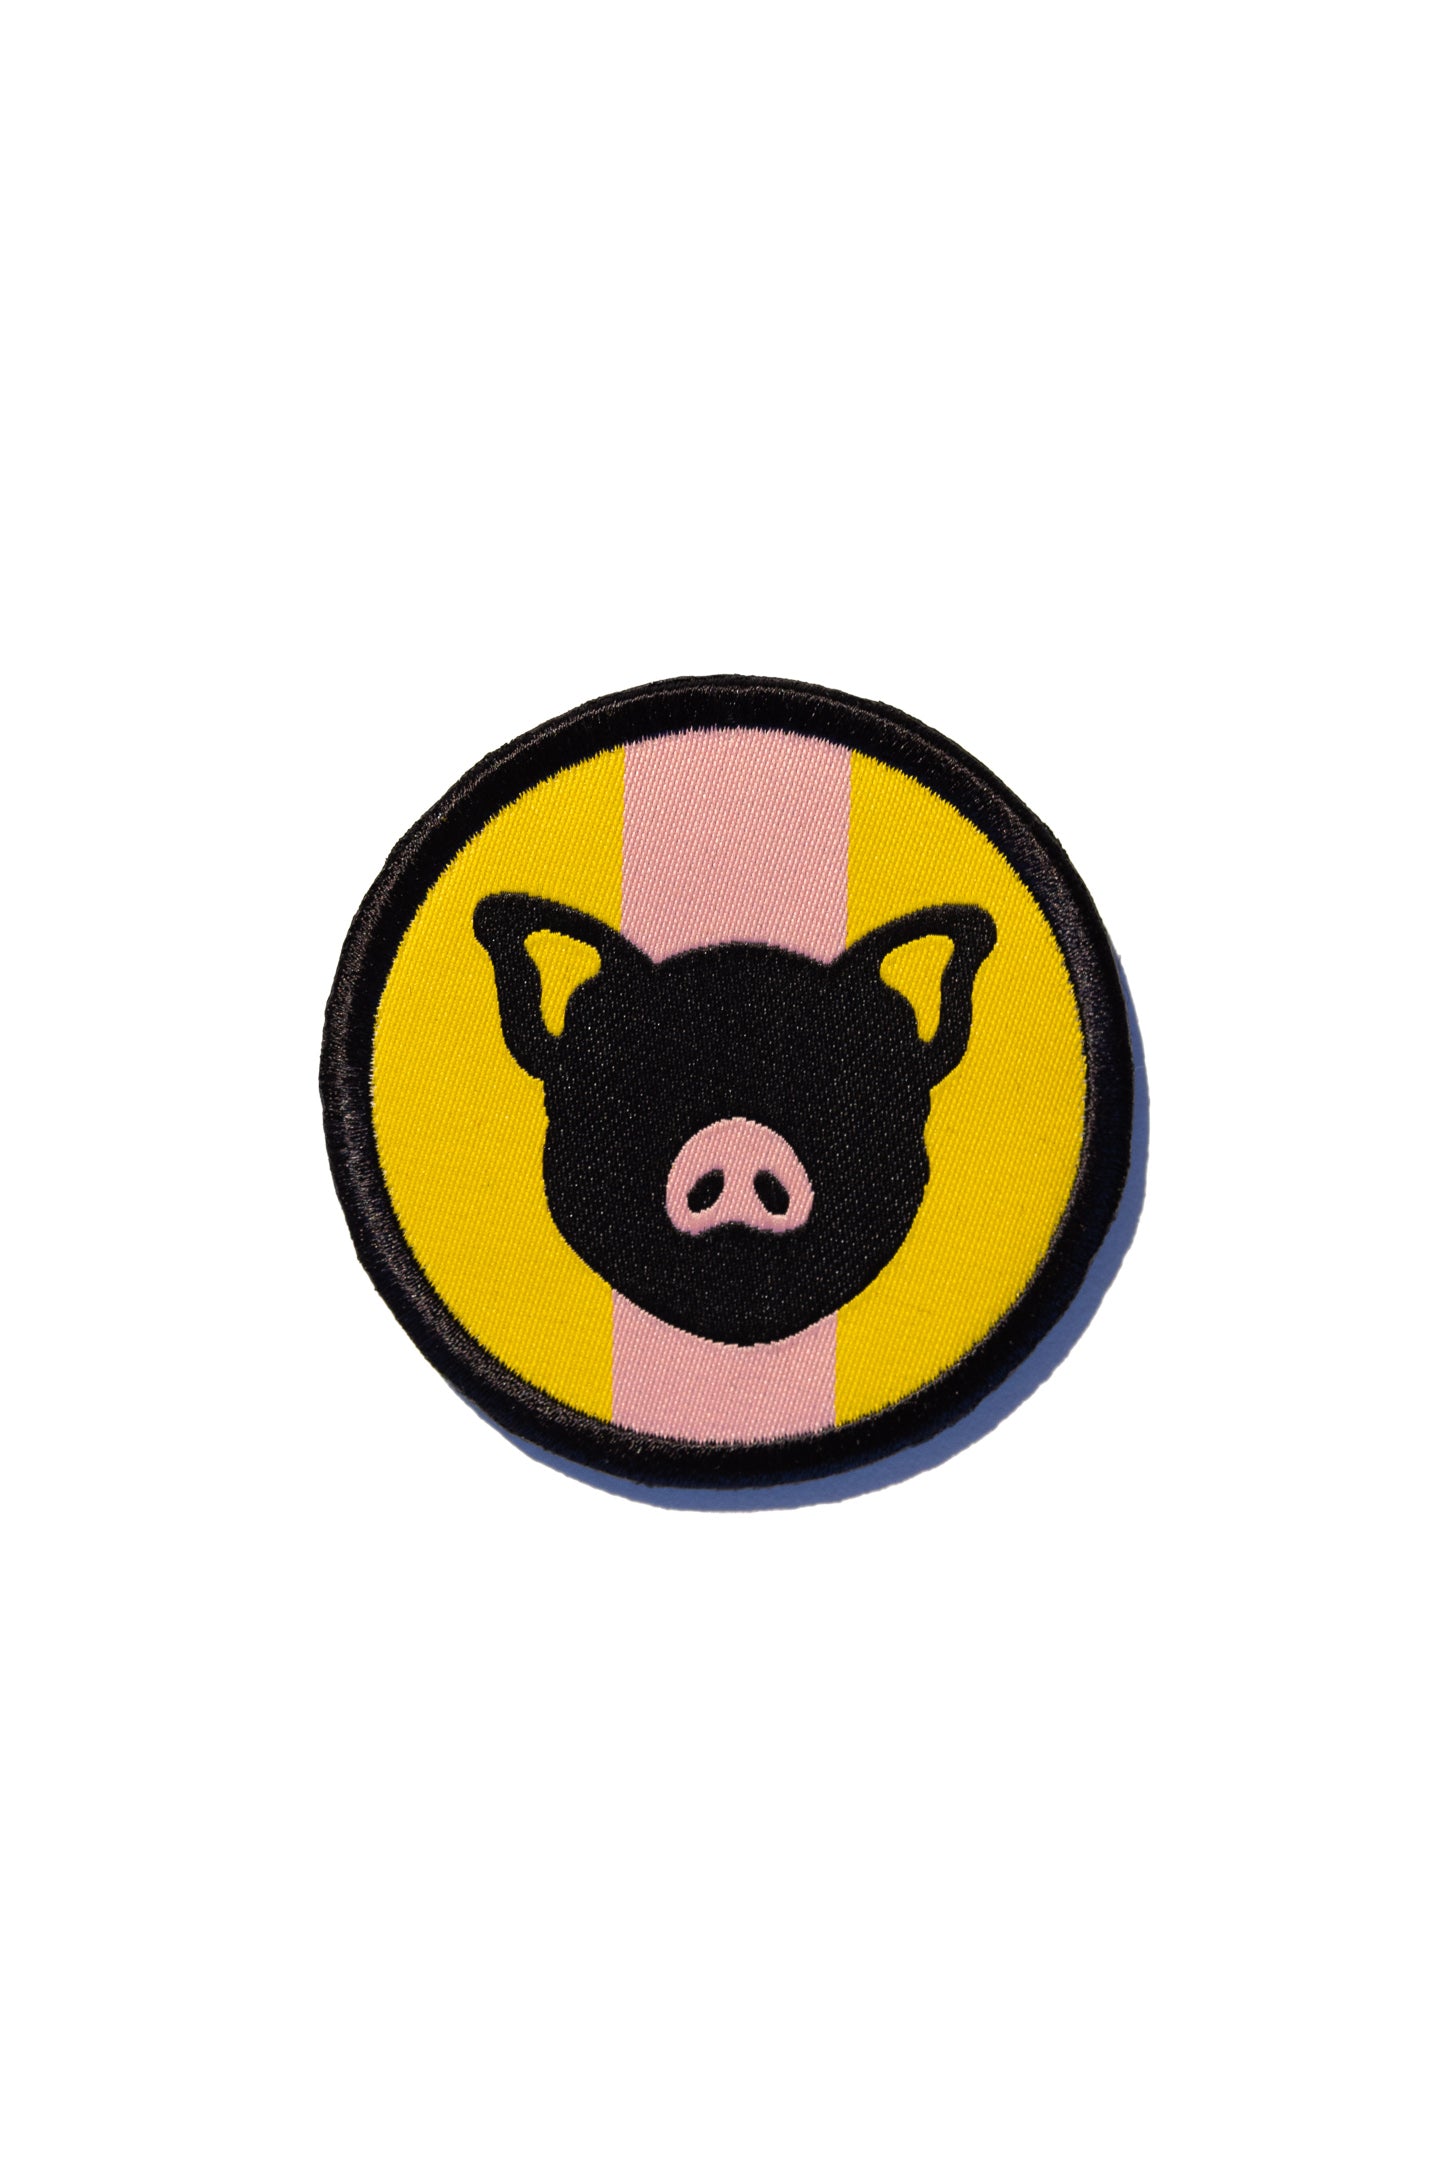 PIG ICON; SOUNDOFF X MR 2.5" WOVEN DECAL PATCH